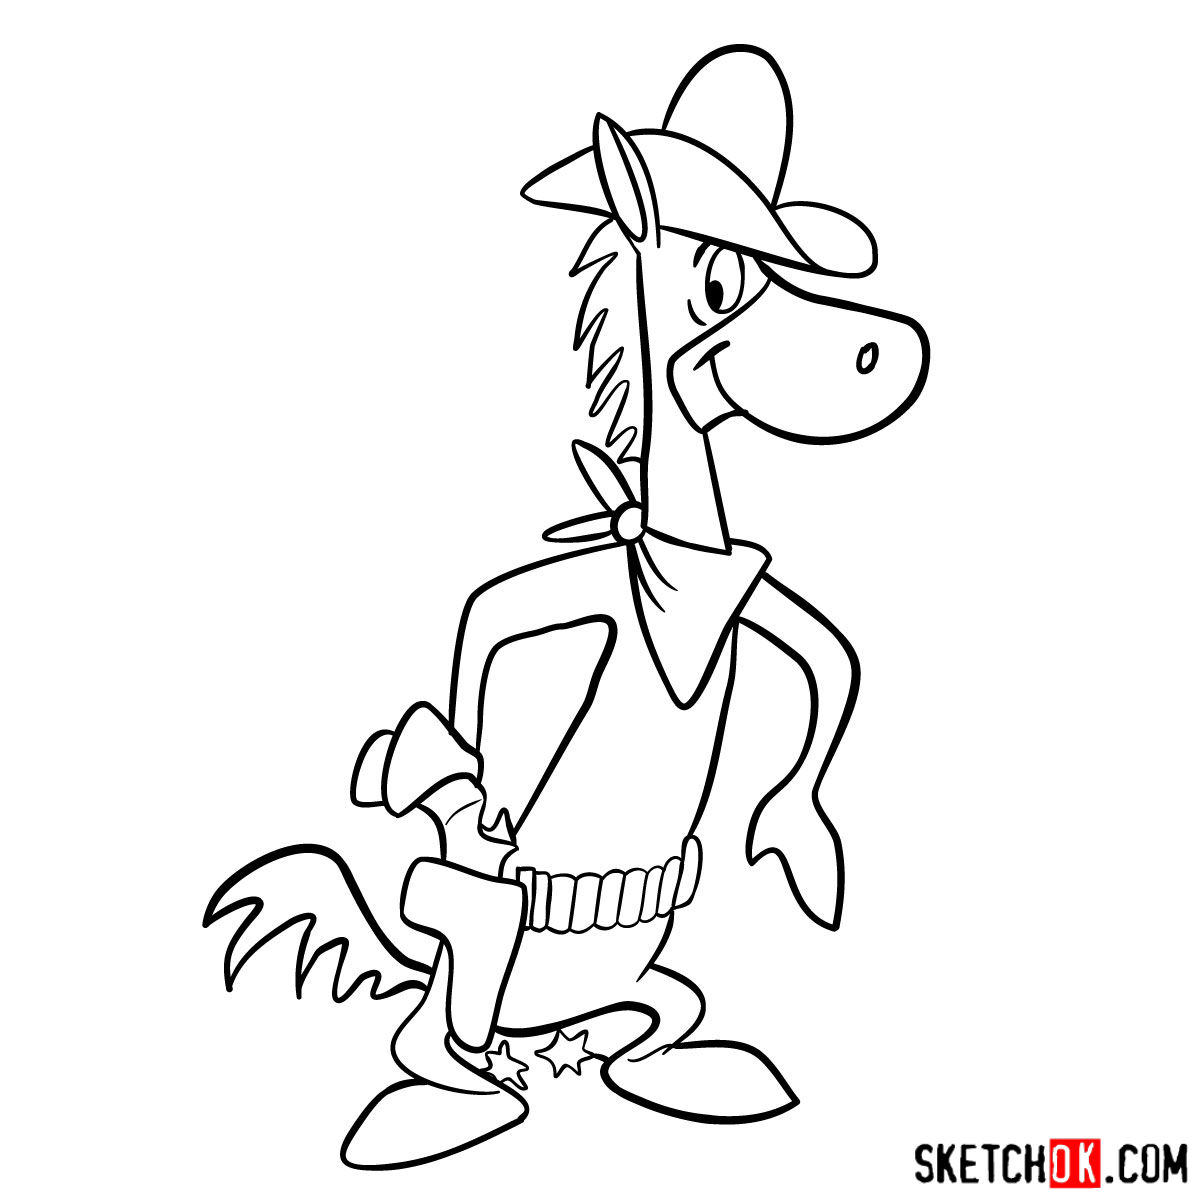 How to draw Quick Draw McGraw - step 11